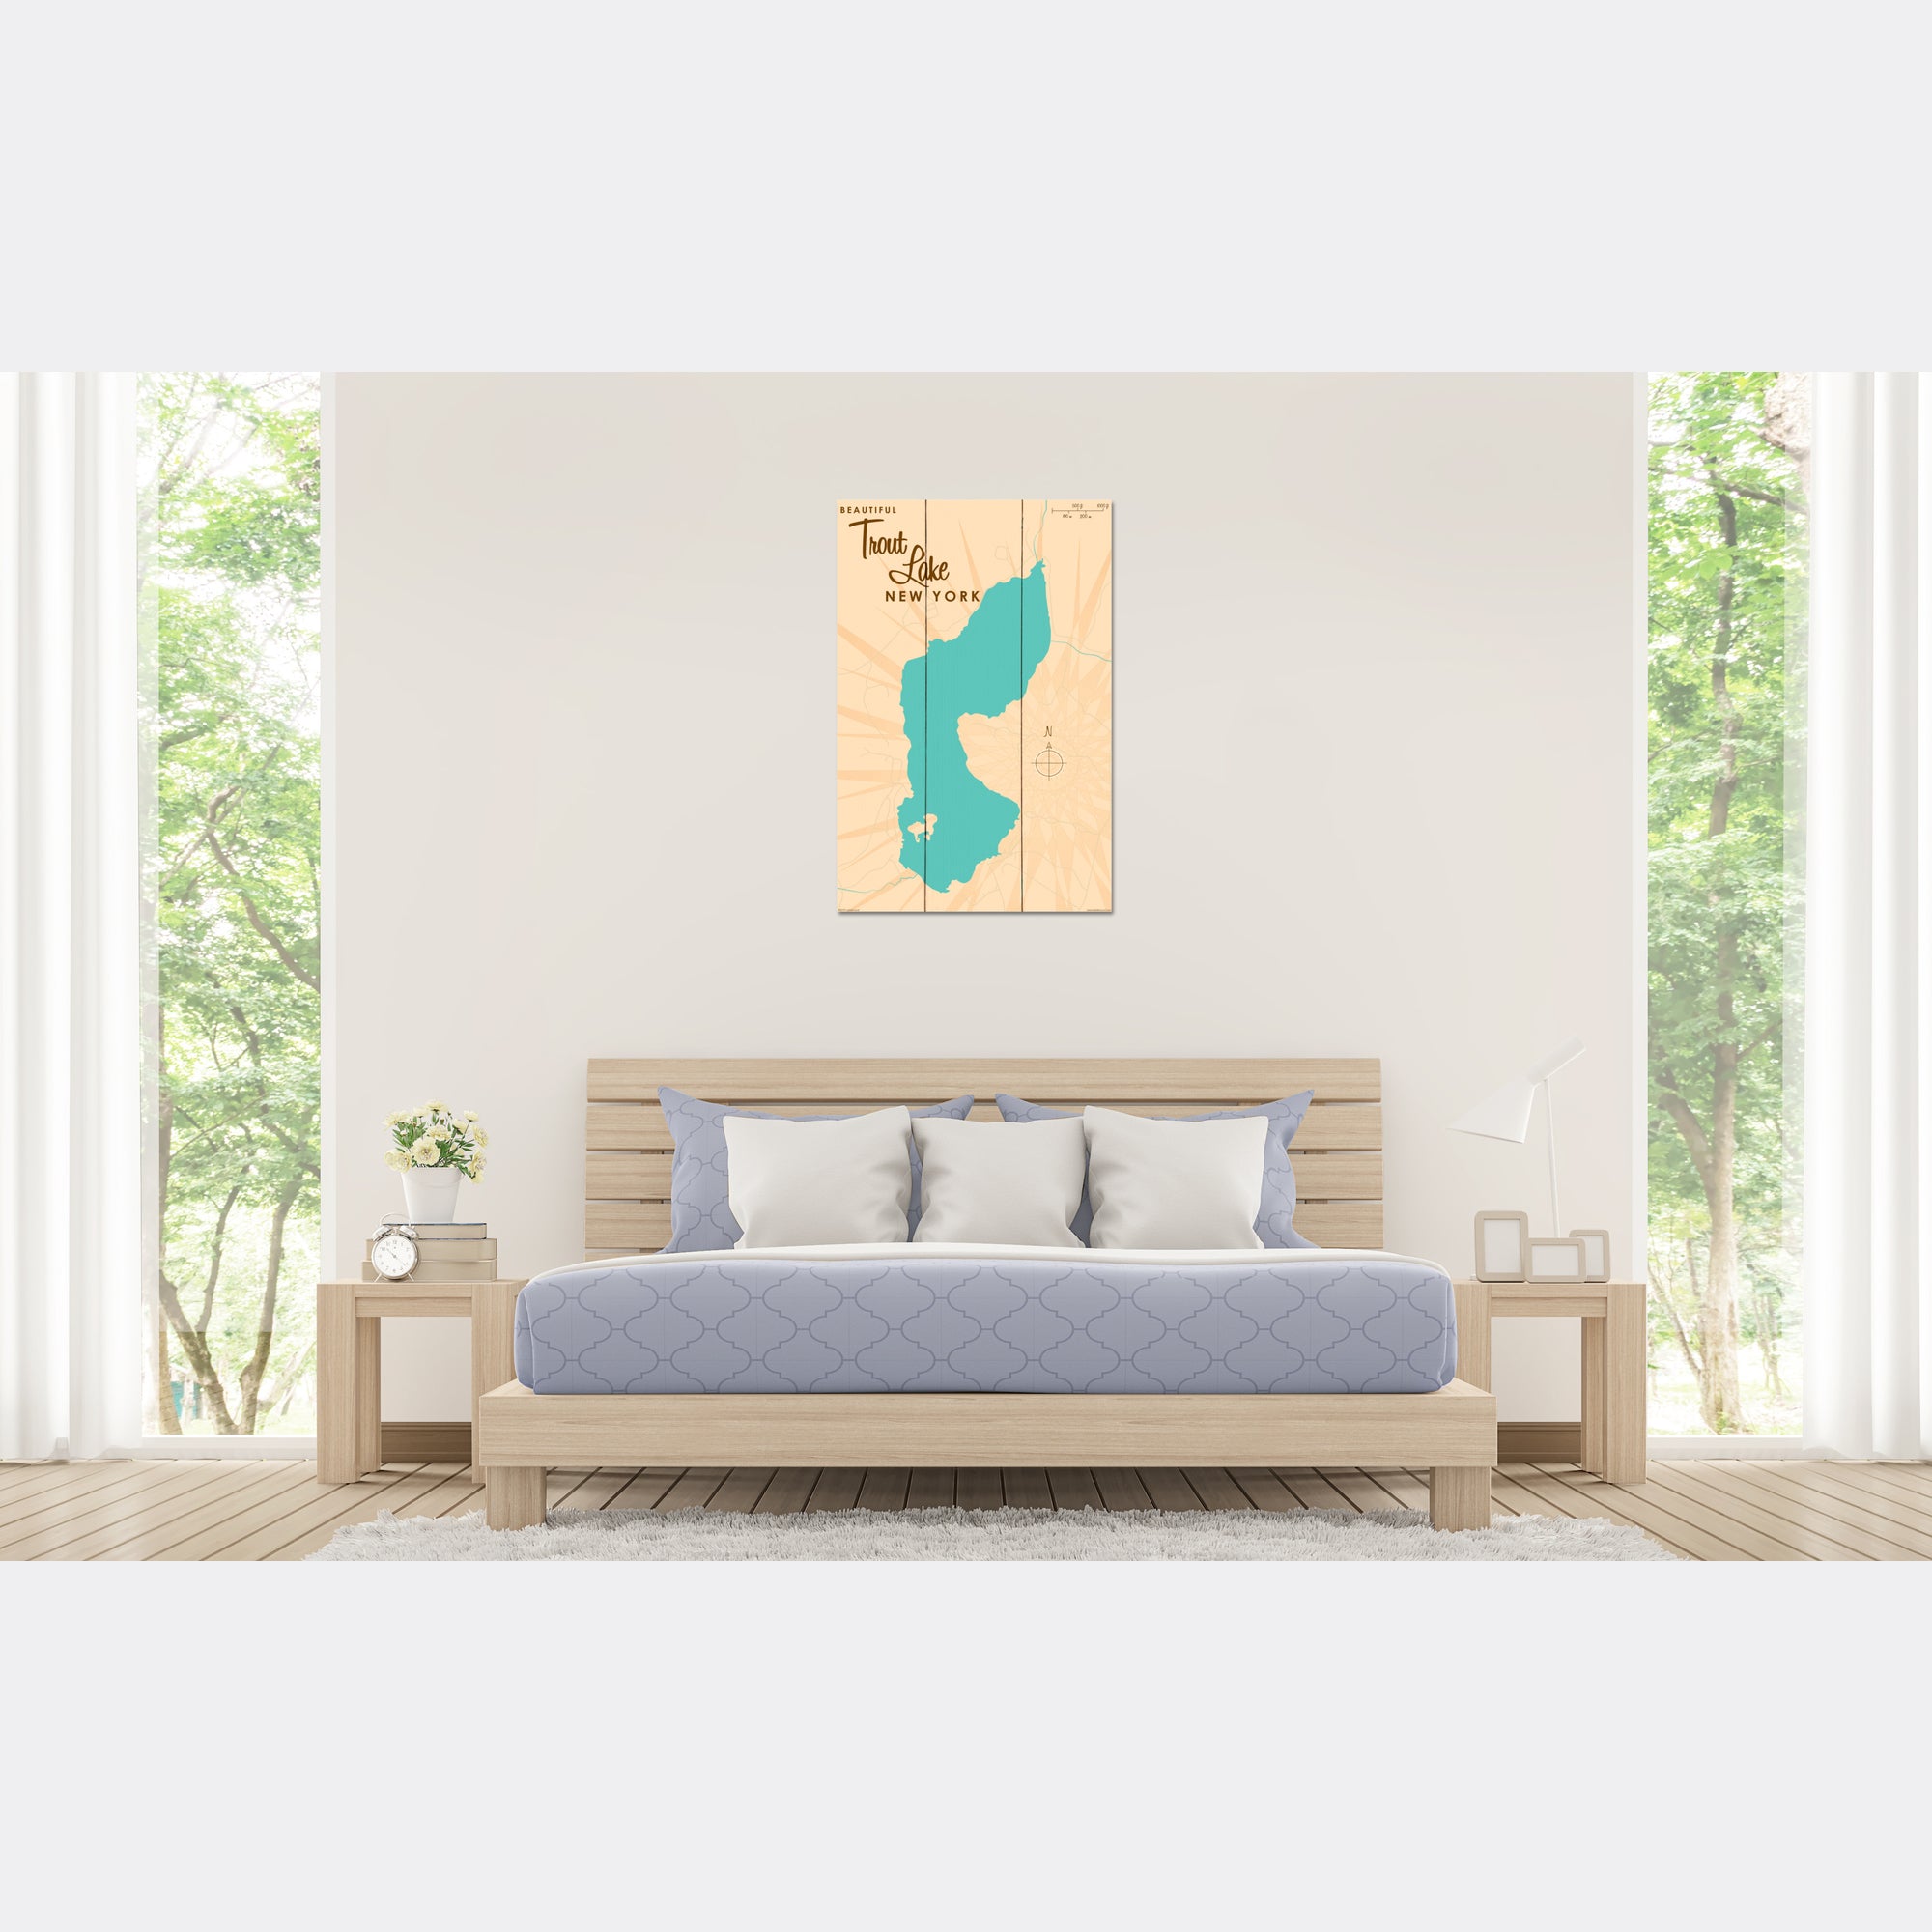 Trout Lake New York, Wood Sign Map Art